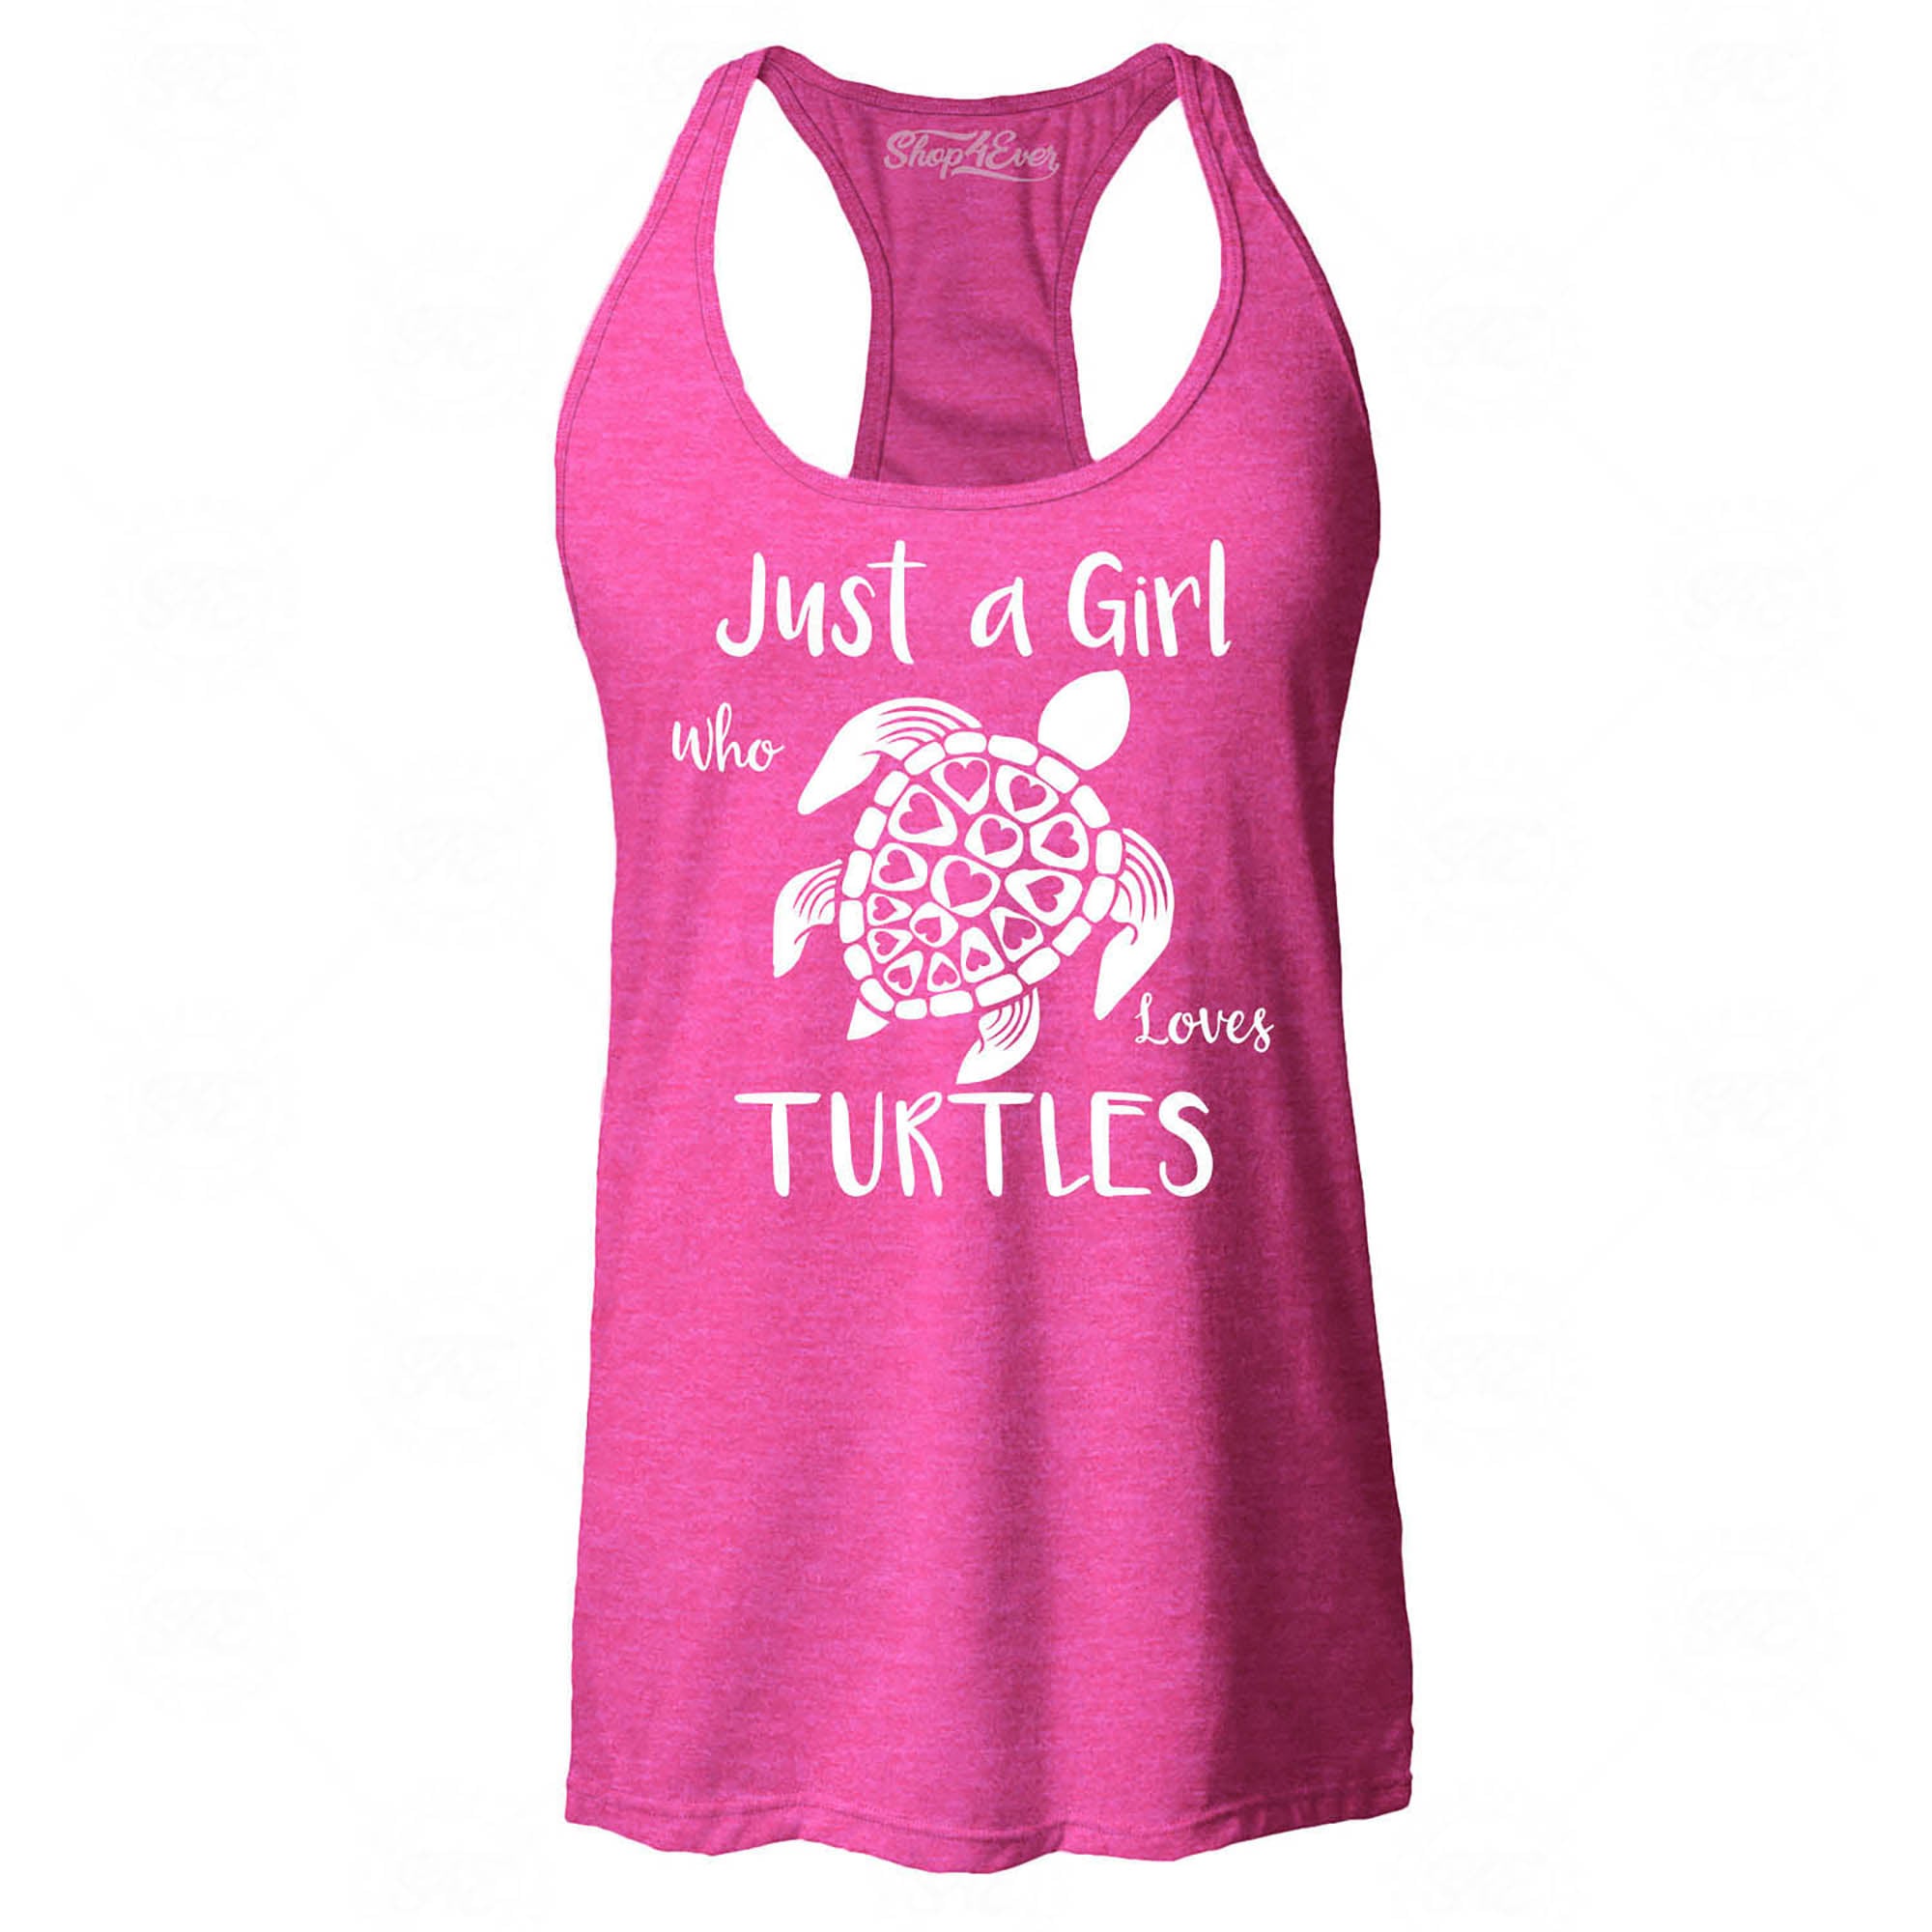 Just A Girl Who Loves Turtles Women's Racerback Tank Top Slim Fit